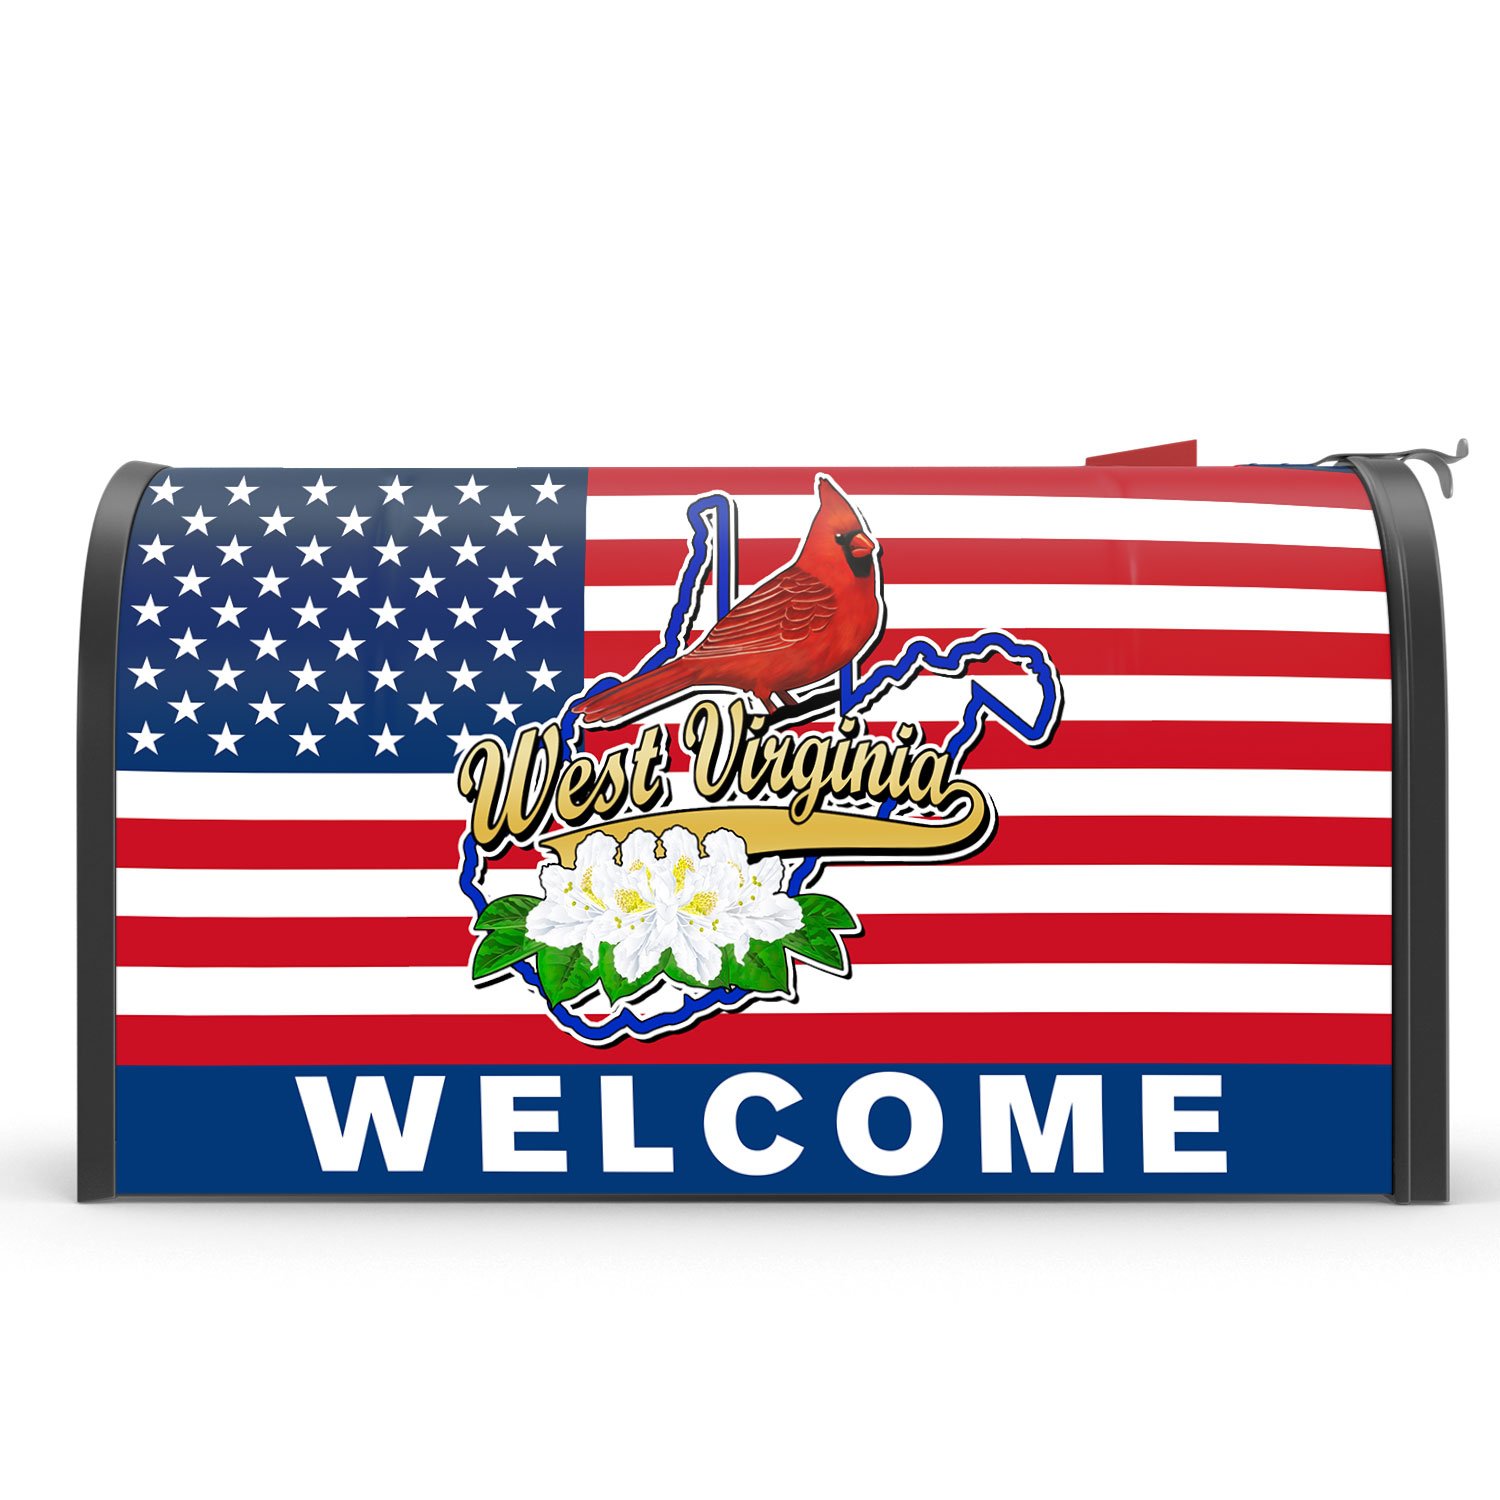 West Virginia Mailbox Cover Home Sweet Home TQN614MBCT